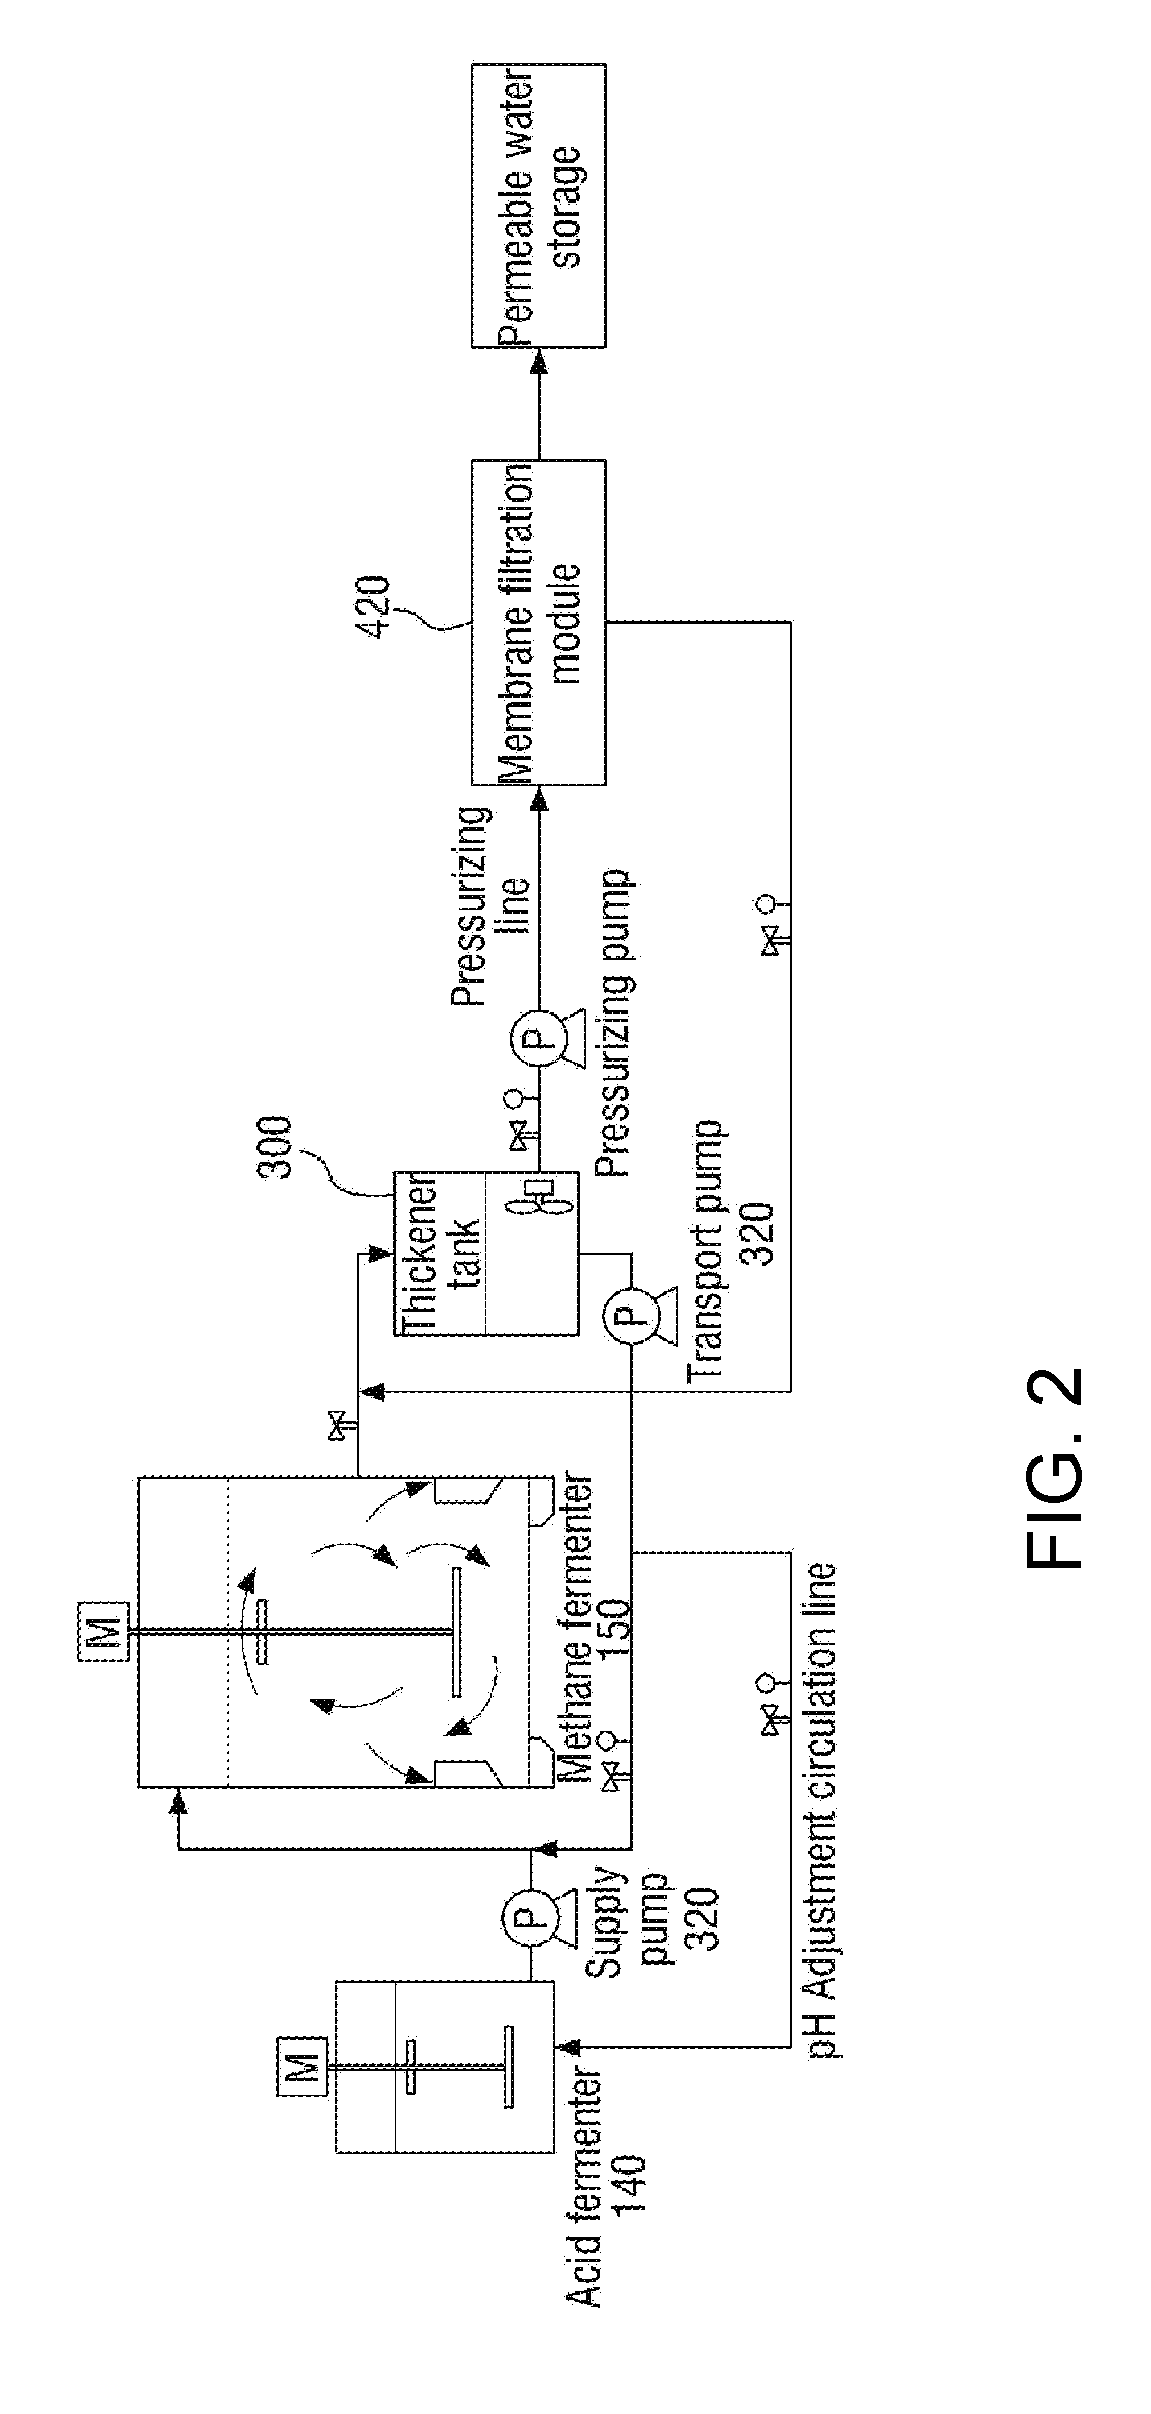 Alternate operation control type membrane-coupled organic waste treatment apparatus and method of operating the same